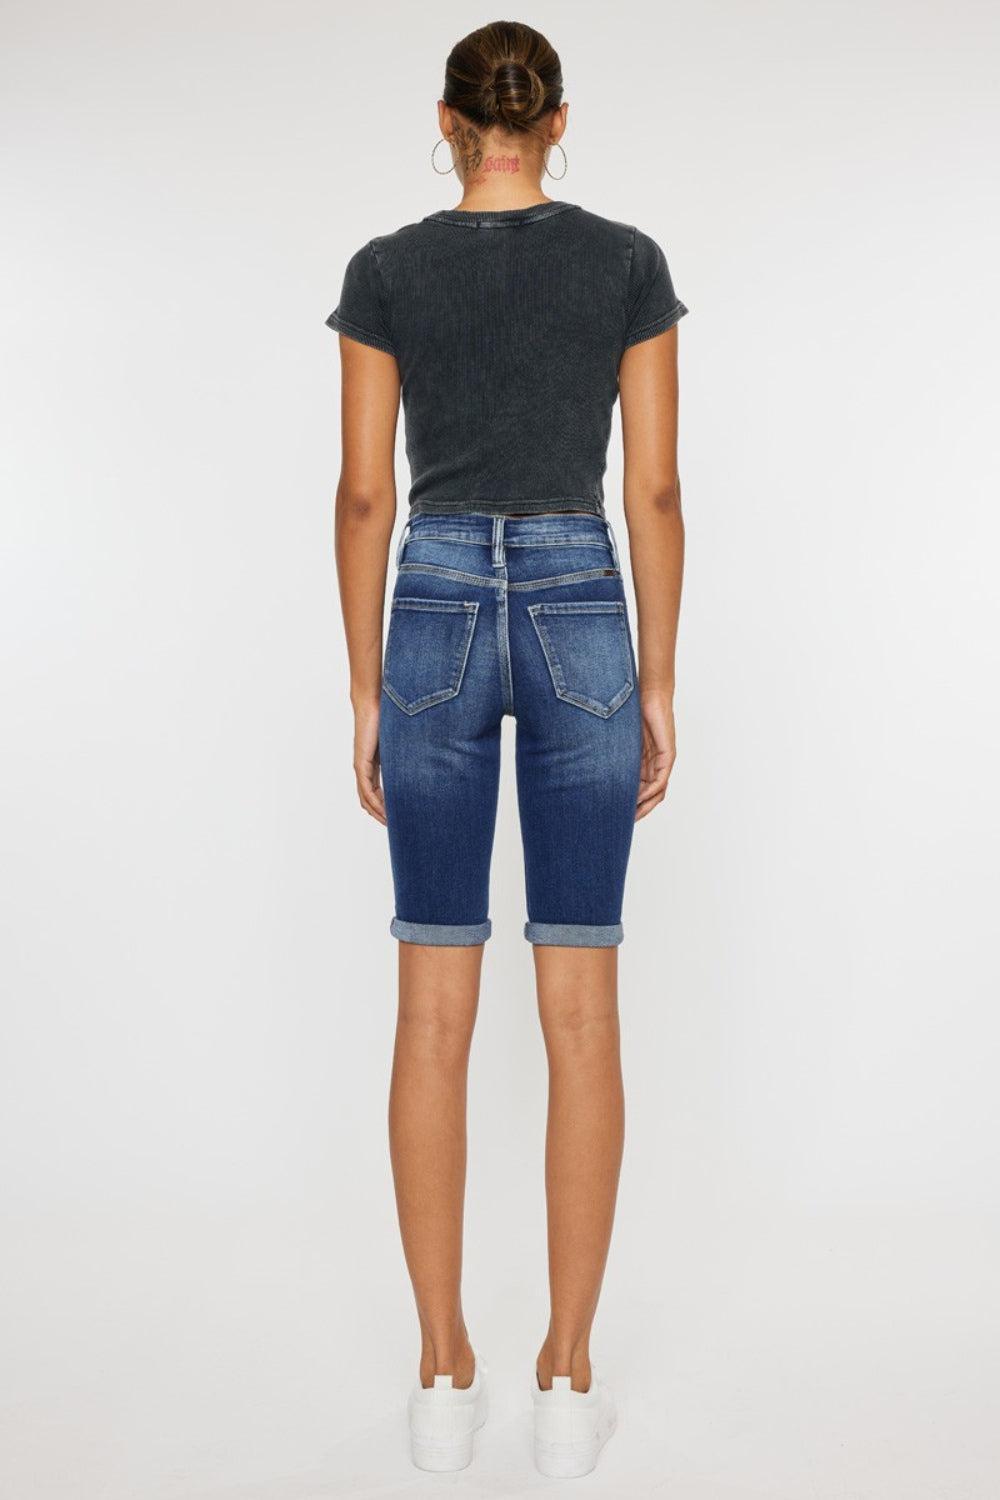 the back of a woman in a black shirt and jeans shorts